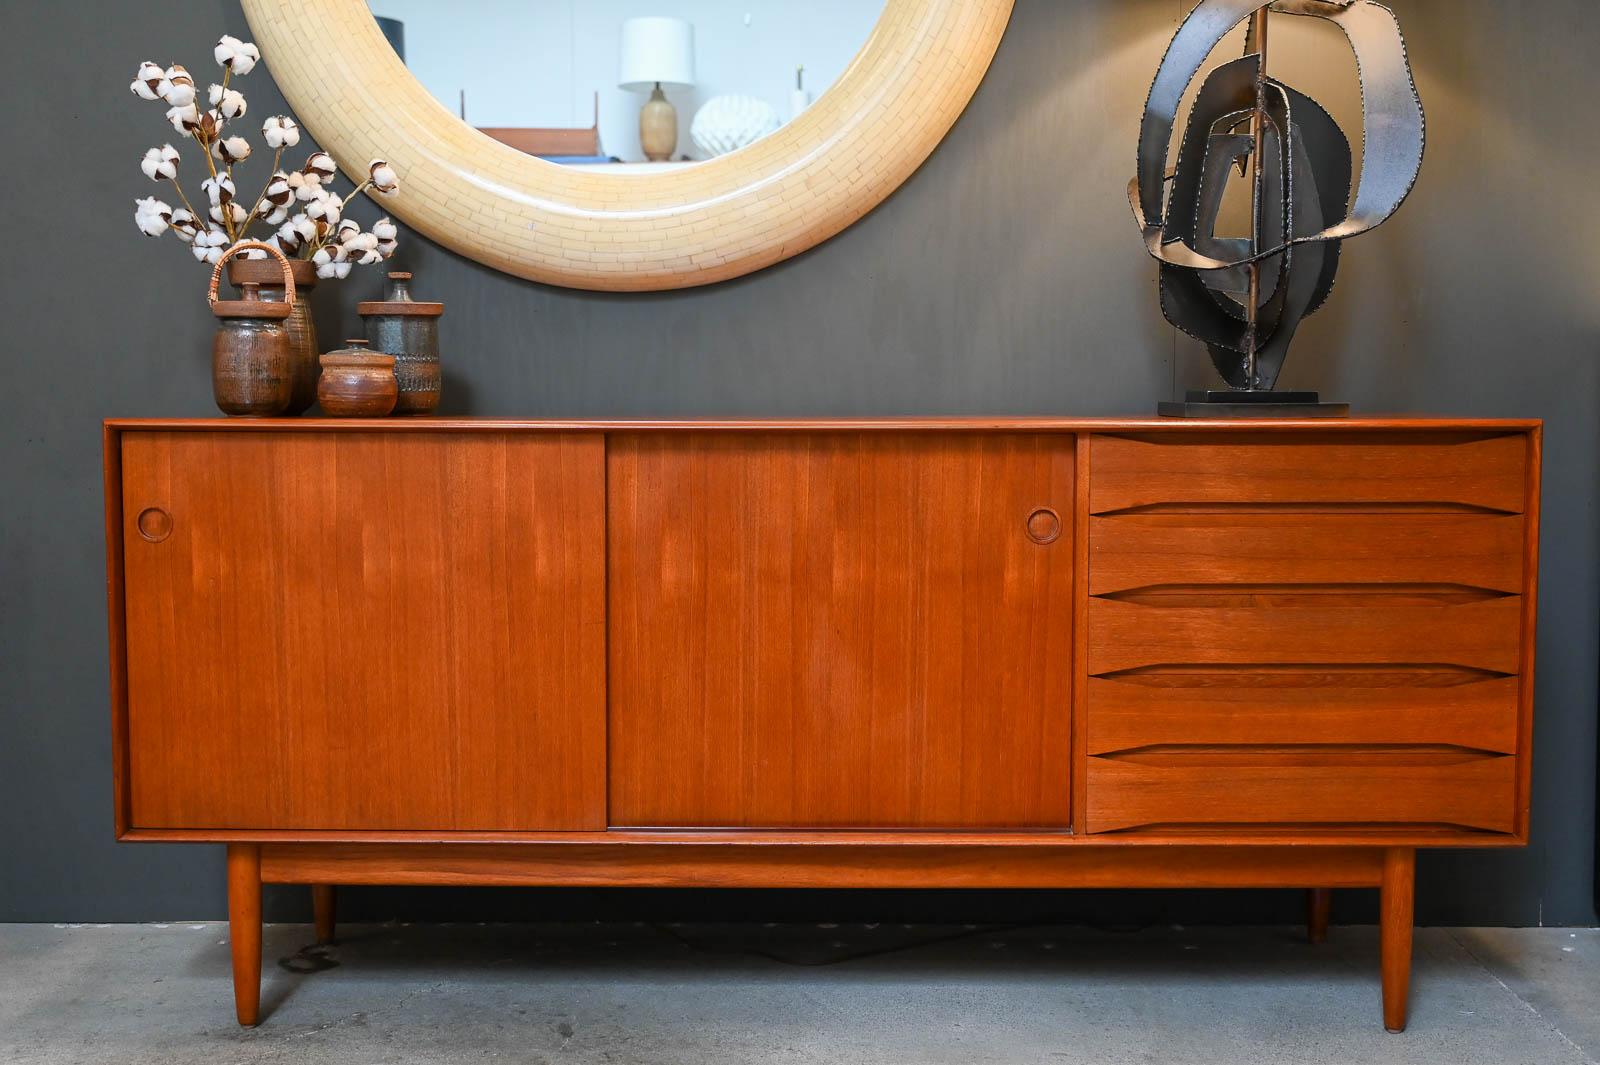 Teak Credenza by Johannes Aasbjerg for Aasbjerg & Ørtoft, ca. 1960.  Johannes Aasbjerg designed for his company, Excellent Furniture Company in Denmark.  This cabinet is exceptional with solid teak outer cabinet frame with exposed edge joinery and